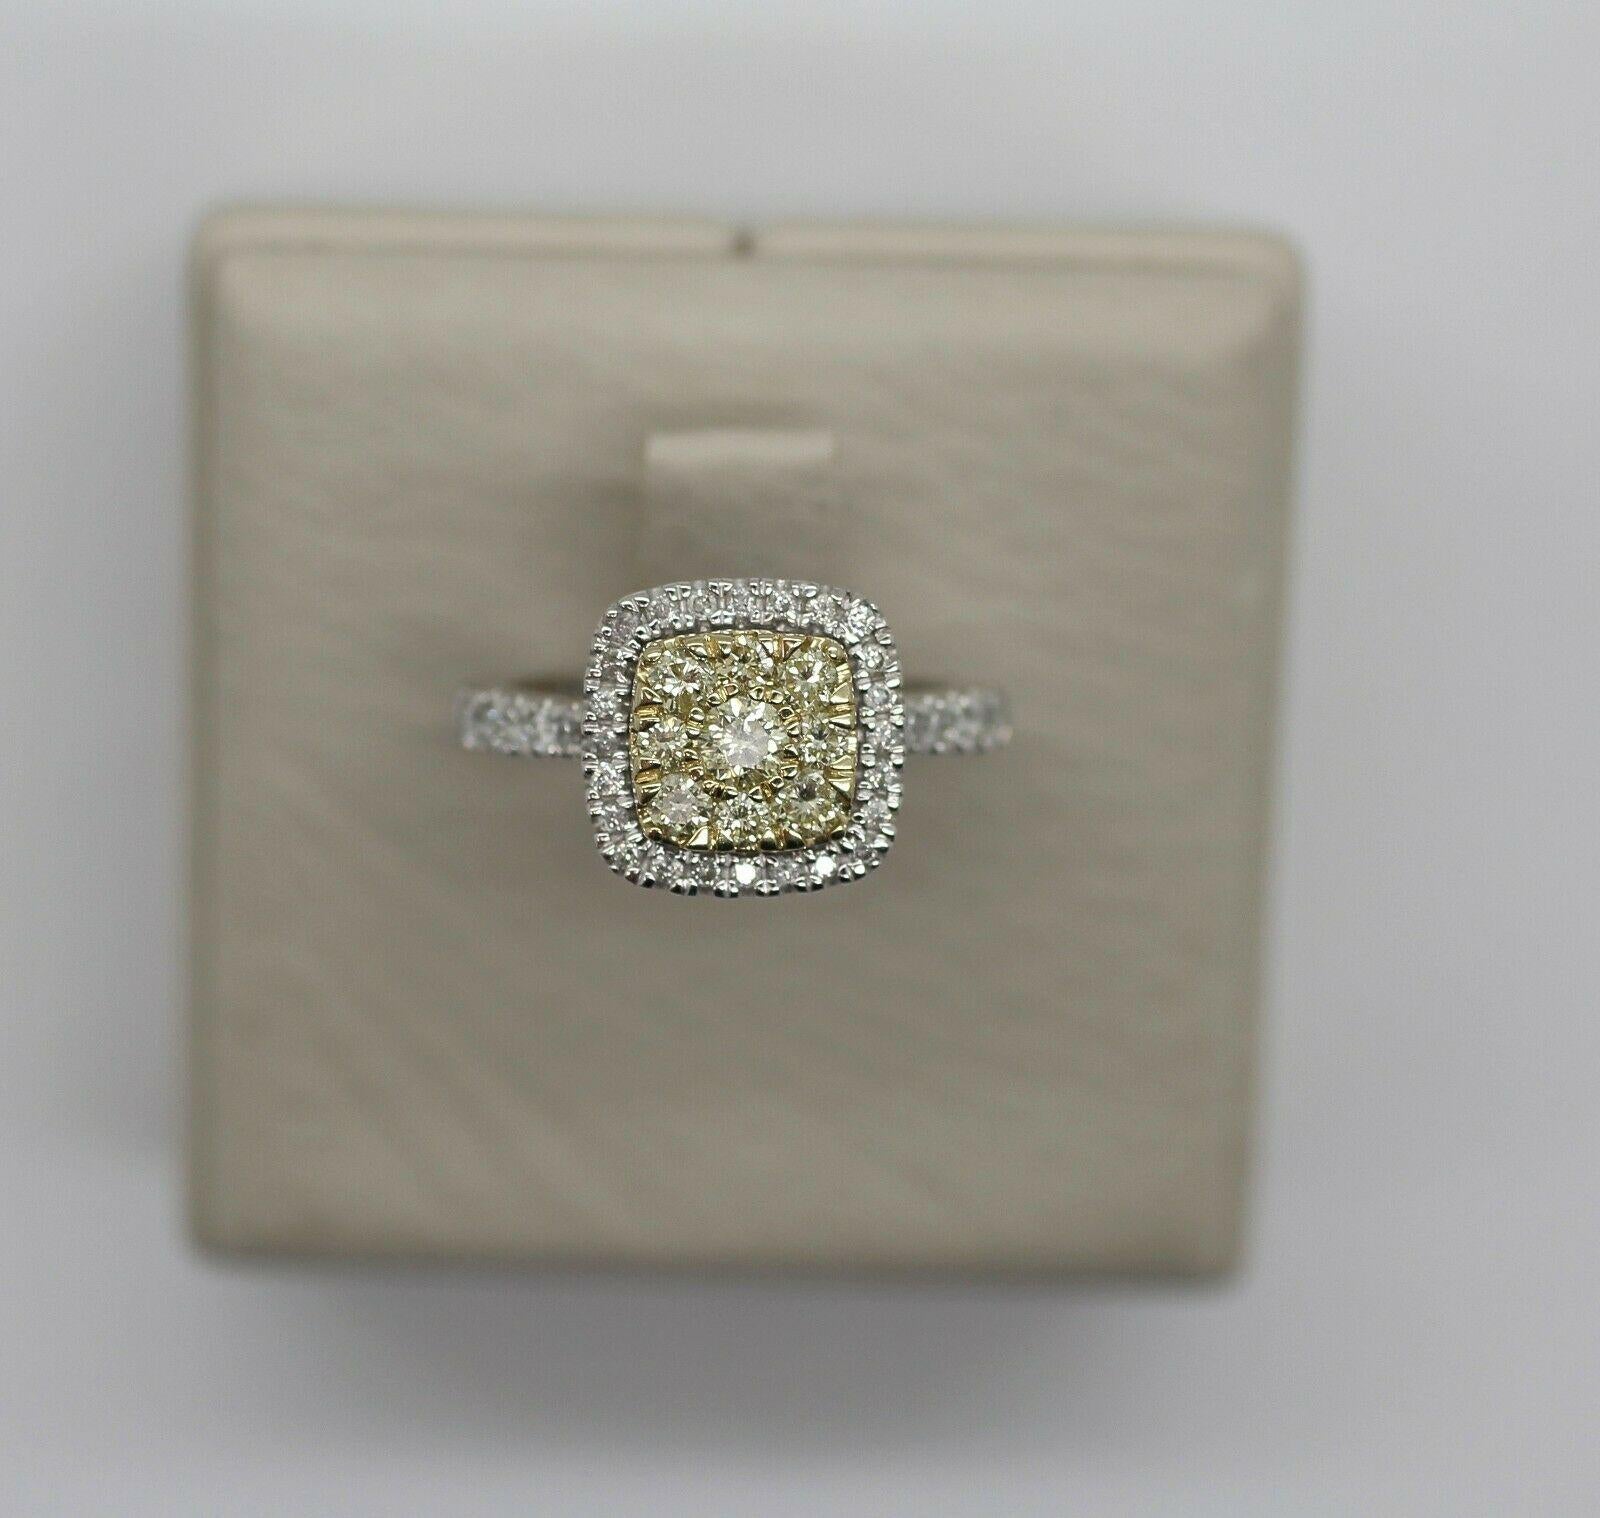 Item specifics
Condition:
Pre-owned:Seller Notes:
“IN GREAT CONDITION”
Total Carat Weight:APPROXIMATELY 0.85
Diamond Clarity Grade:CENTER SI1-SI2; SIDE STONES I1
Main Stone Width:3 mm
Main Stone Length:3 mm
Type:Ring
Band Width:2.07 MM
Secondary